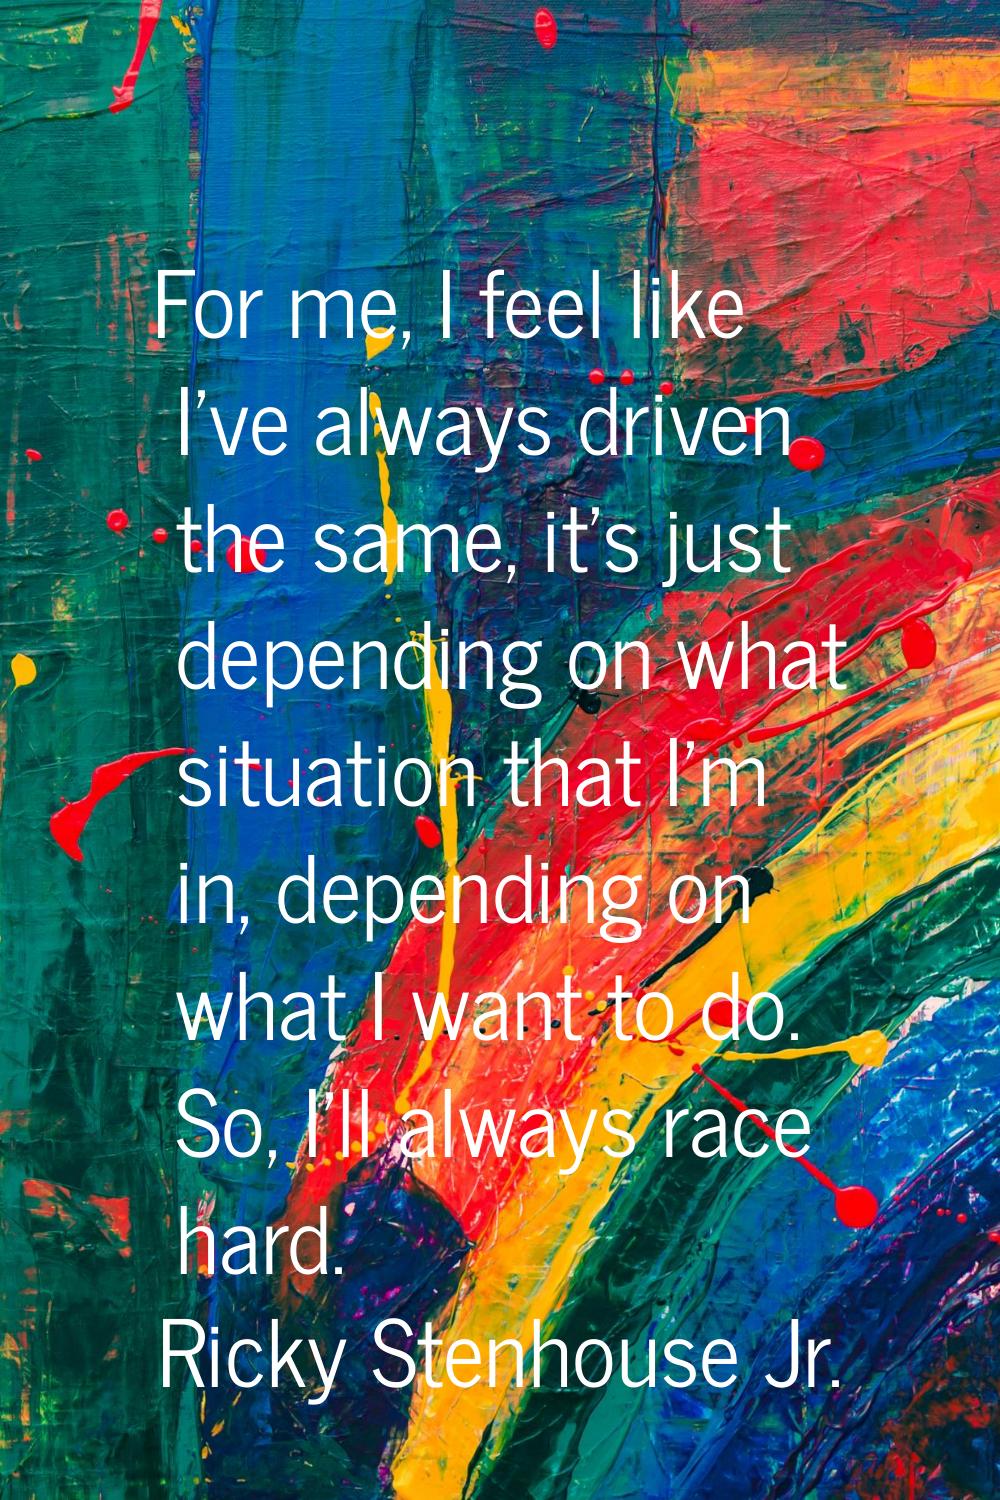 For me, I feel like I've always driven the same, it's just depending on what situation that I'm in,